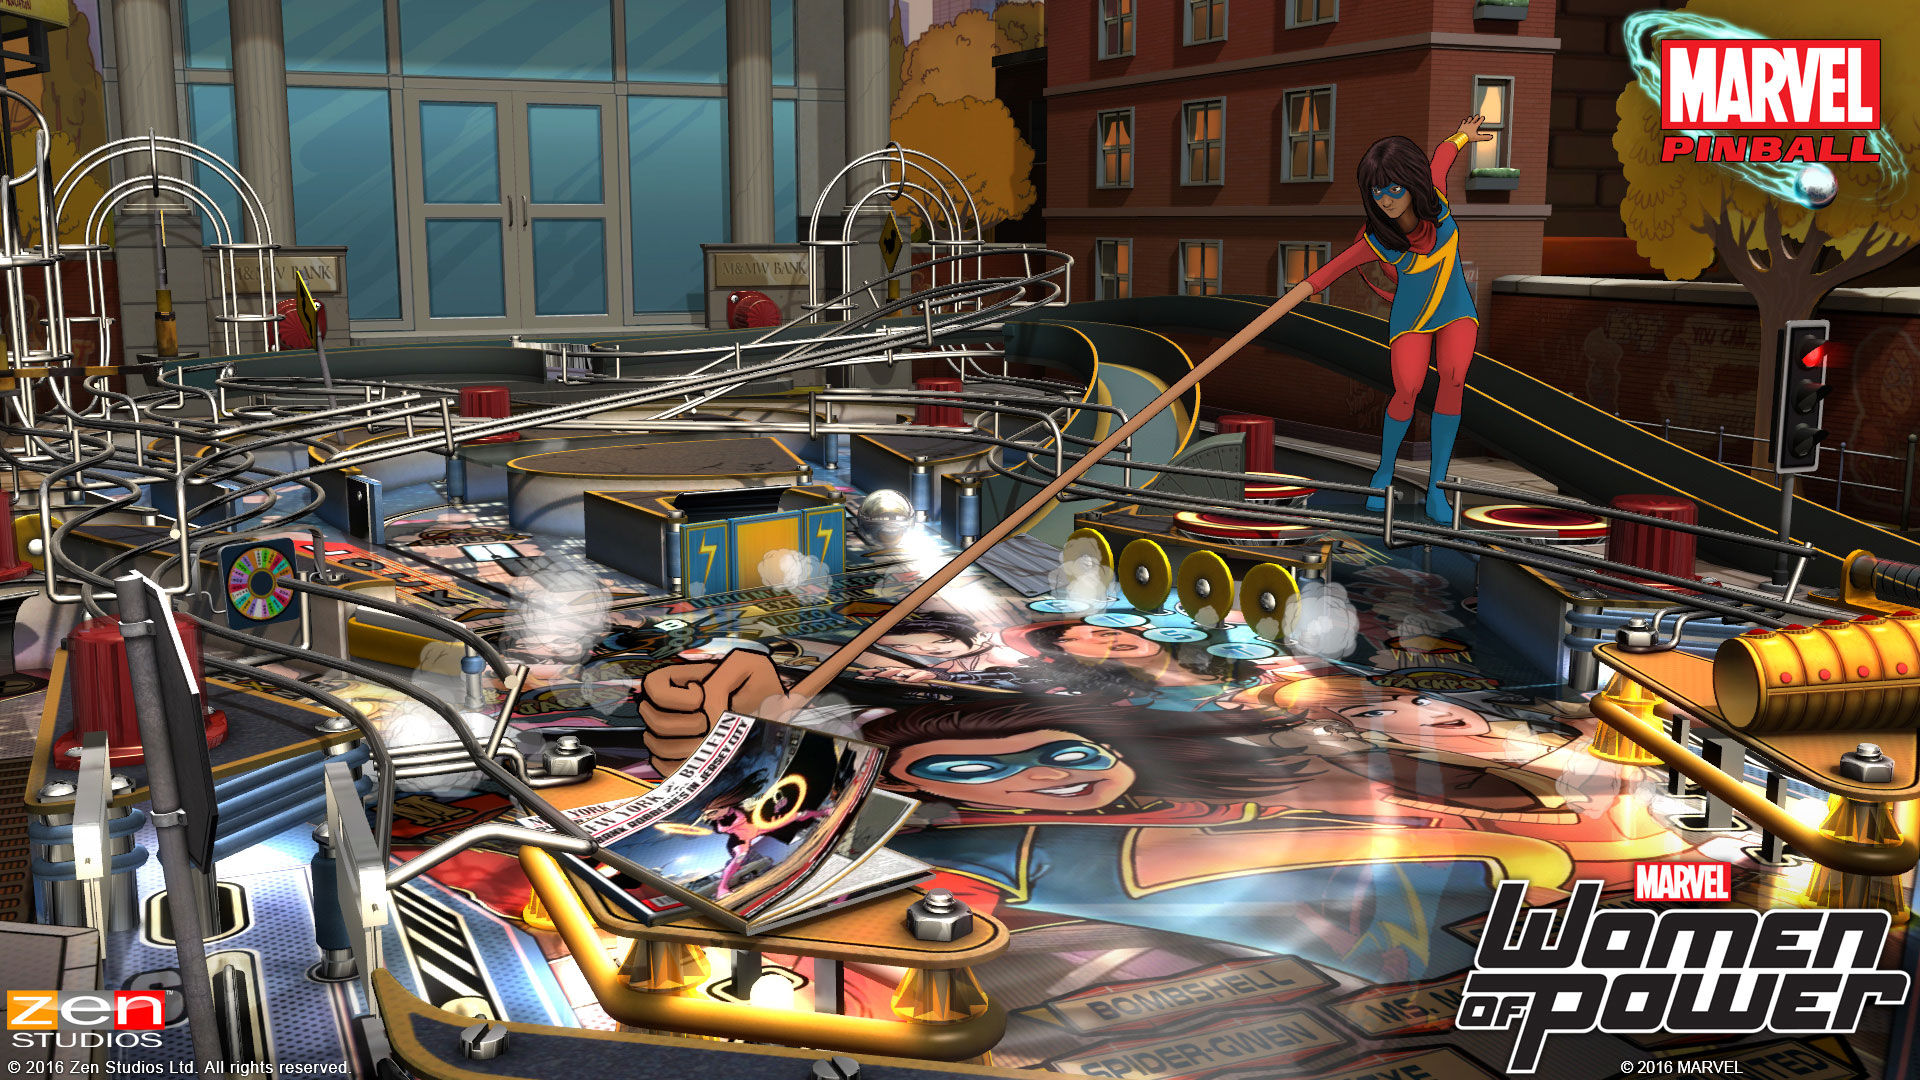 Playing Pinball With Marvel Comics’ Women Of Power